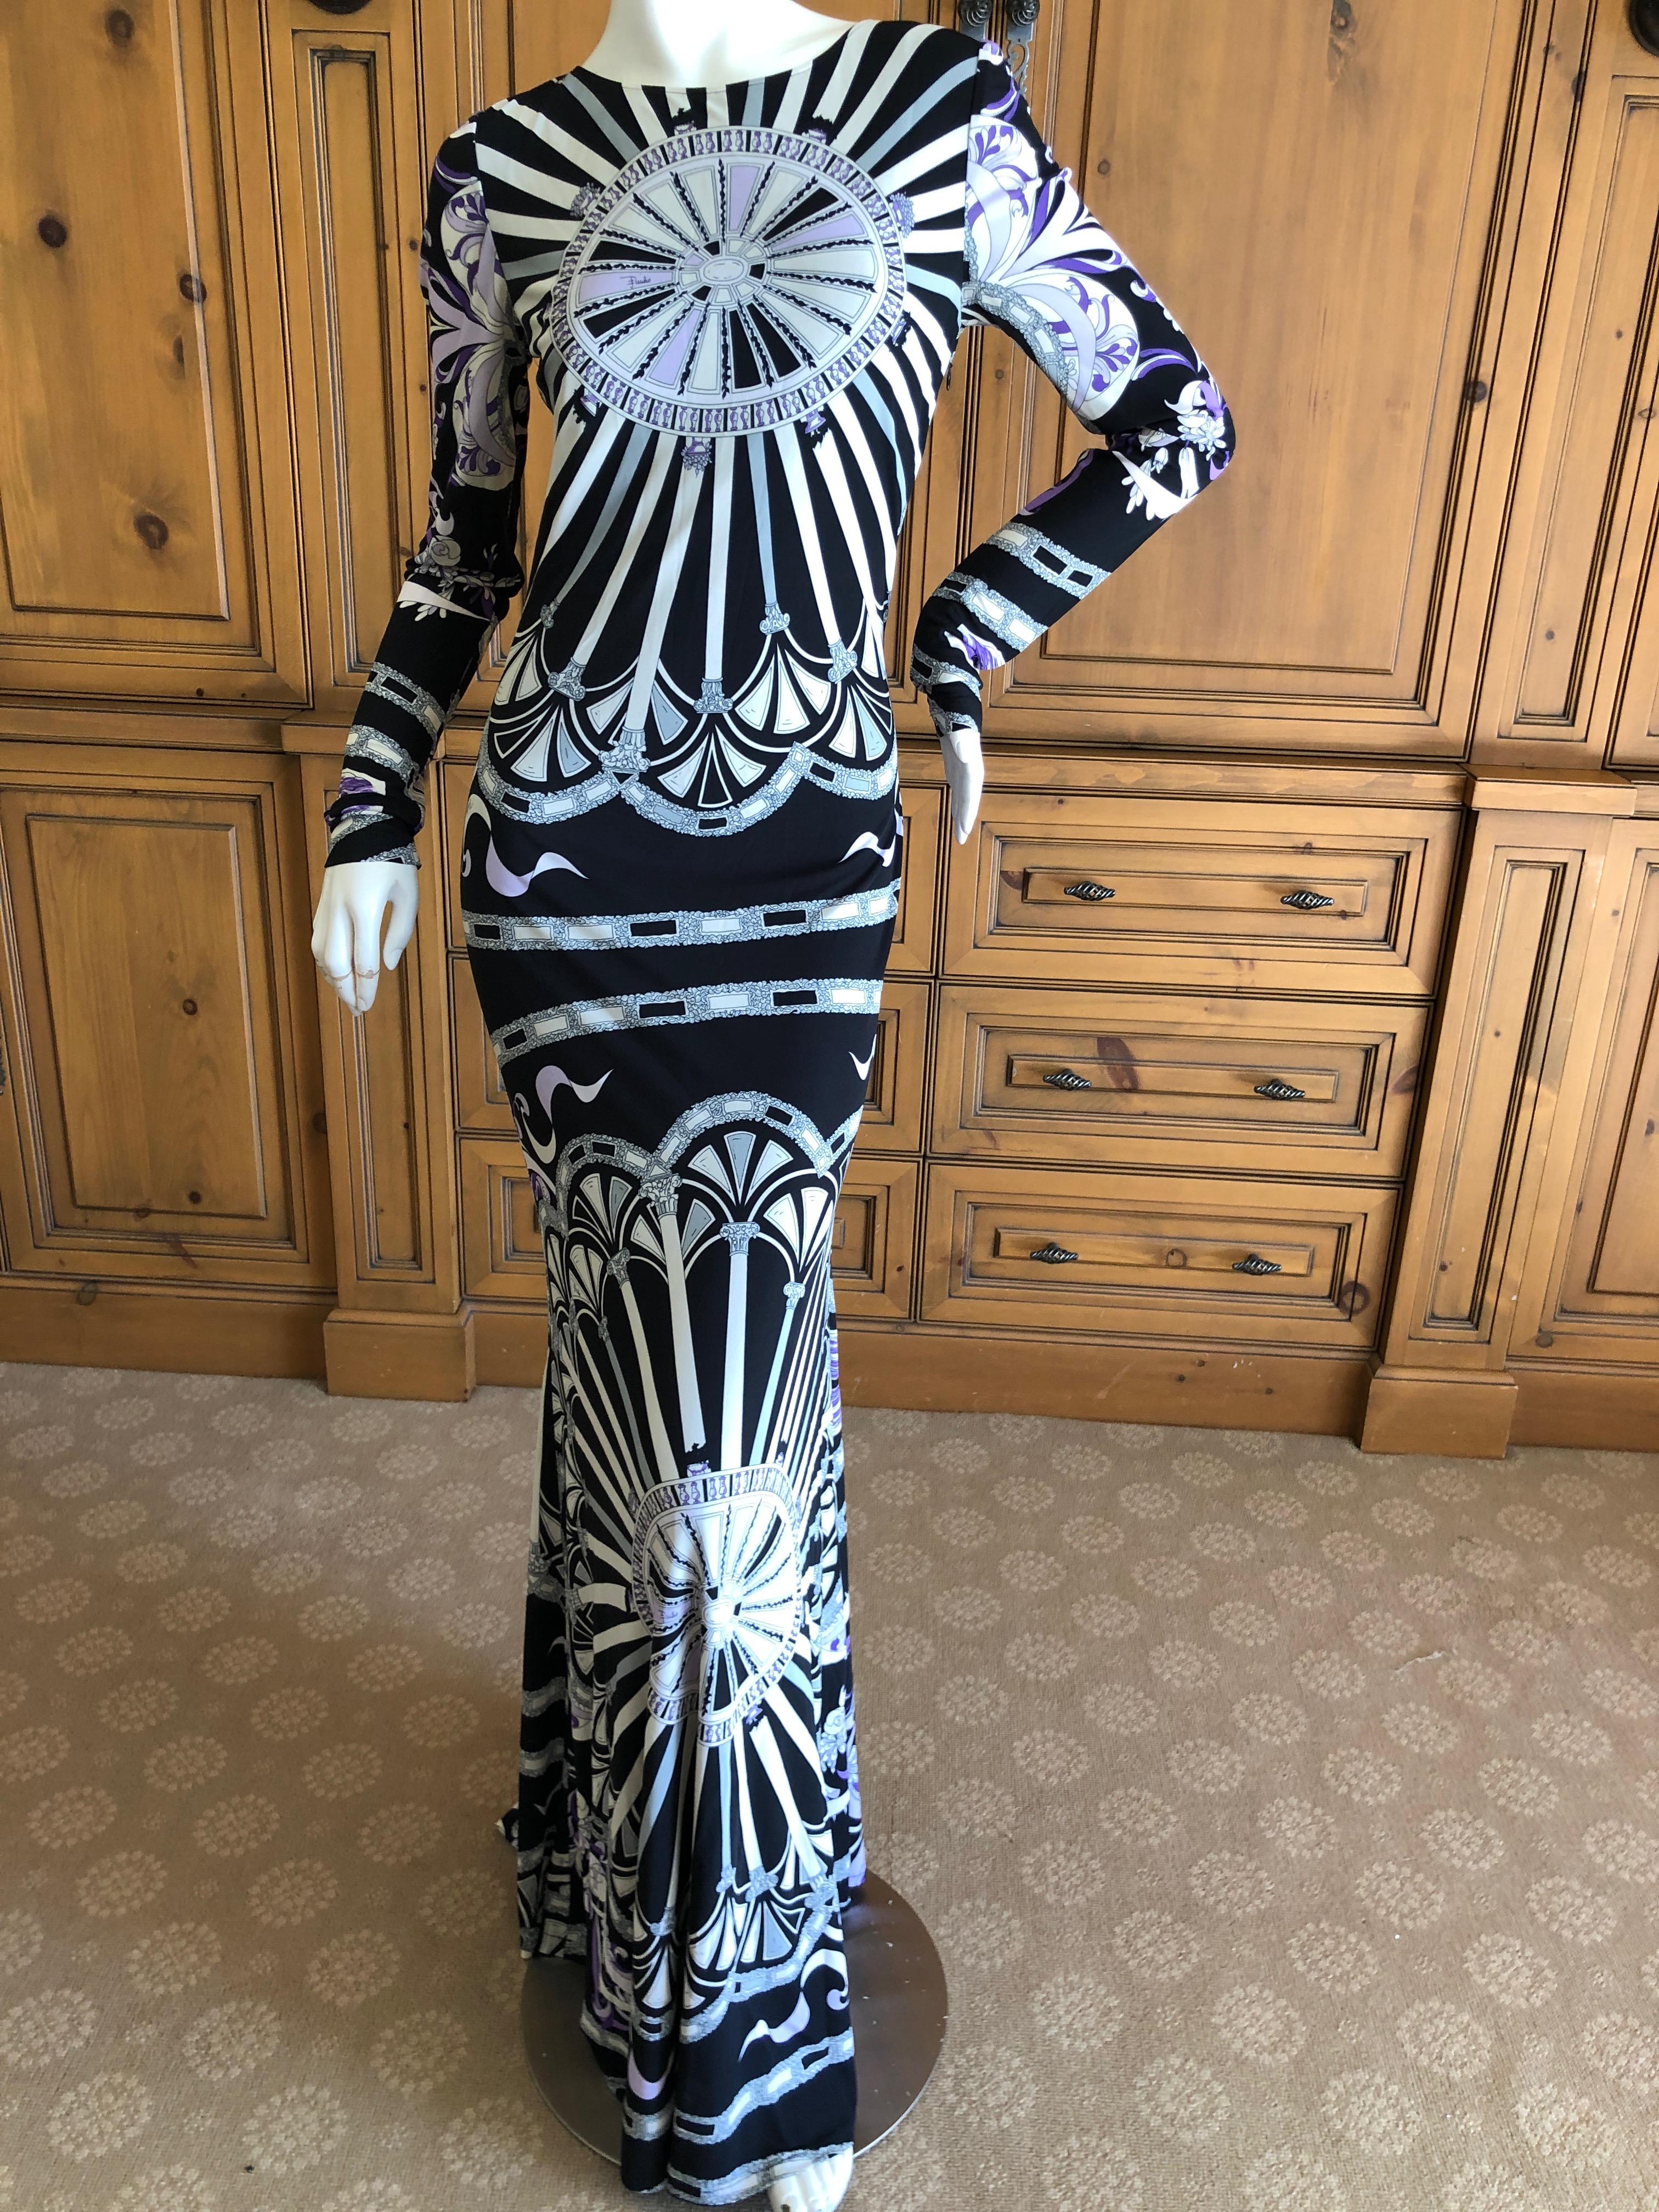 Emilio Pucci Long Evening Dress with Cut Out Back in hard to find size 44
Bust 38